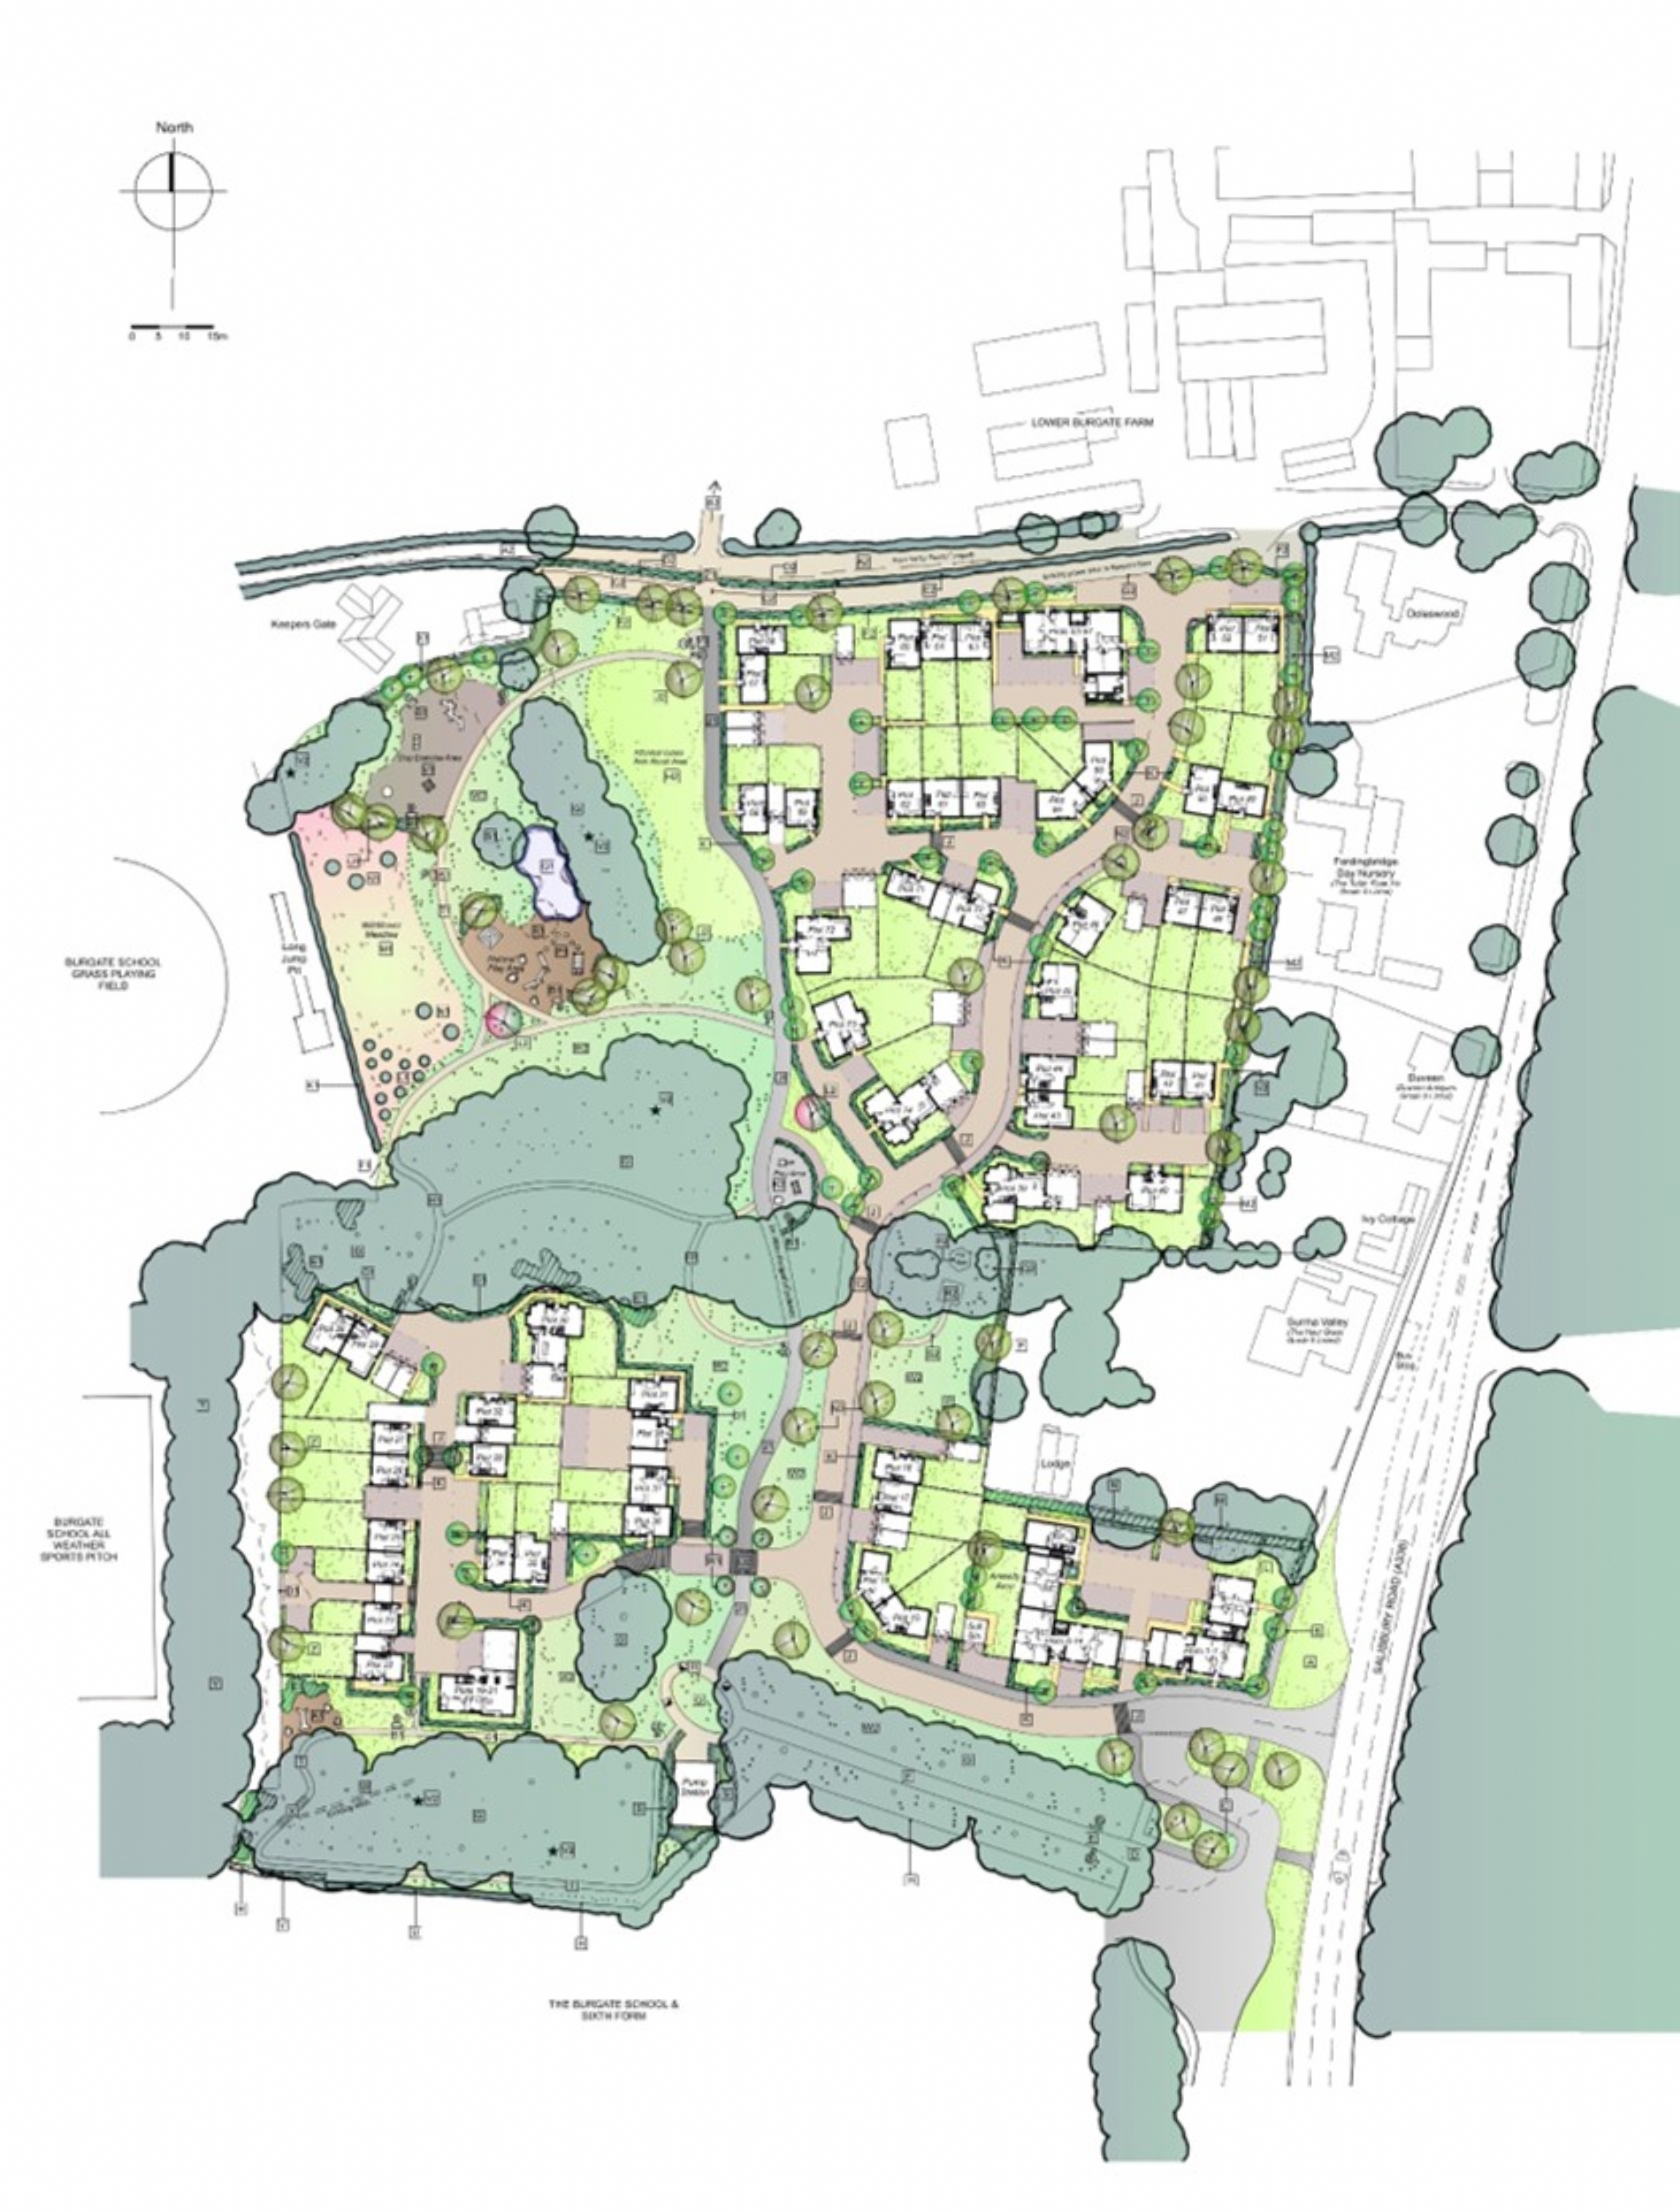 Metis Homes submit planning application for new homes in Fordingbridge